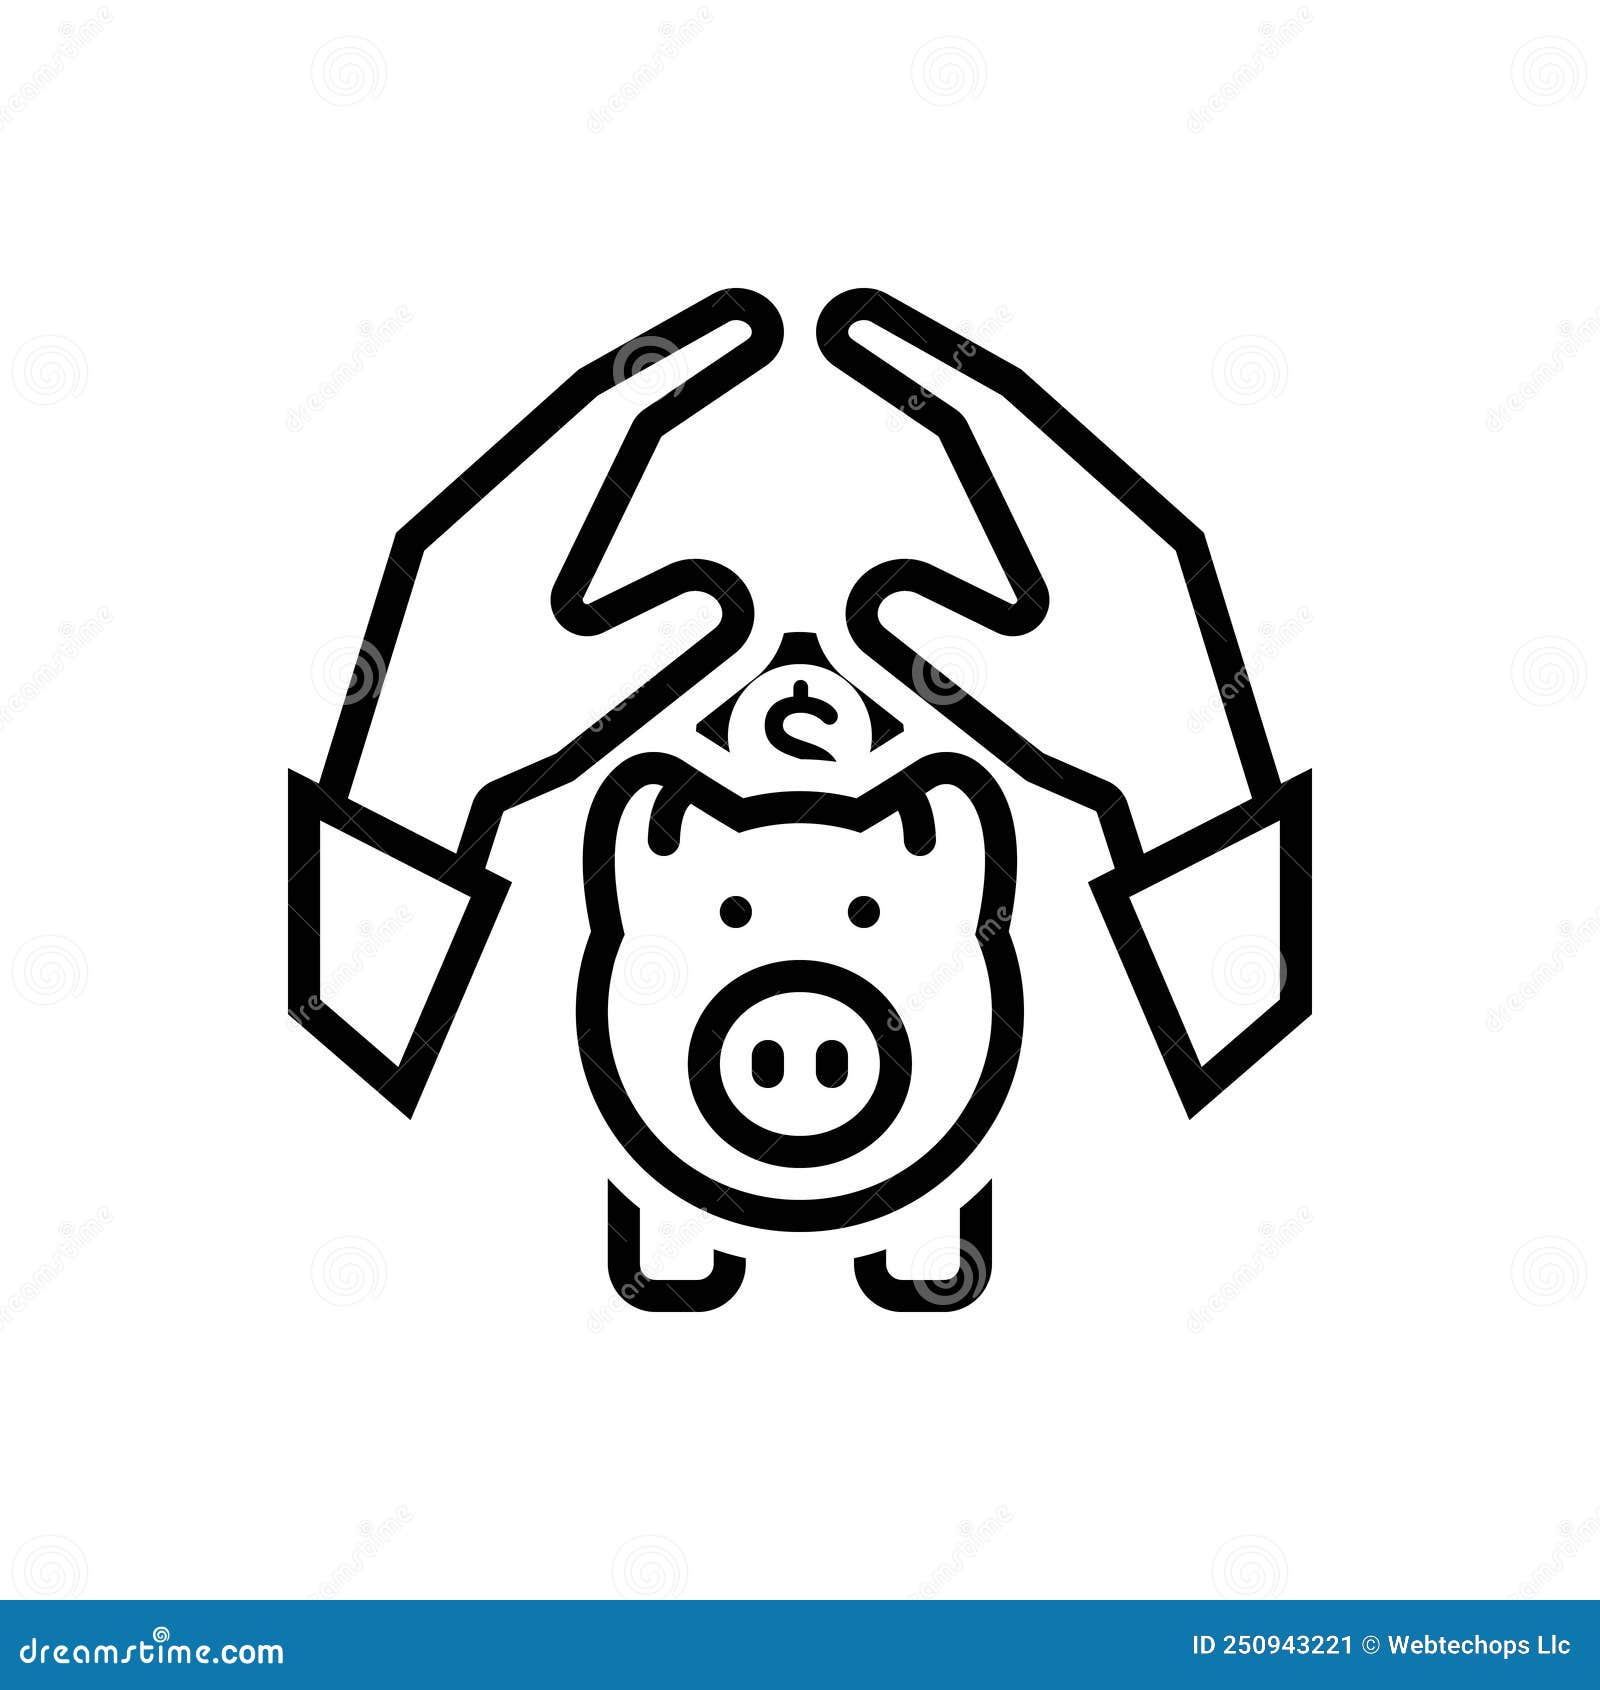 black line icon for savings, parsimony and fund